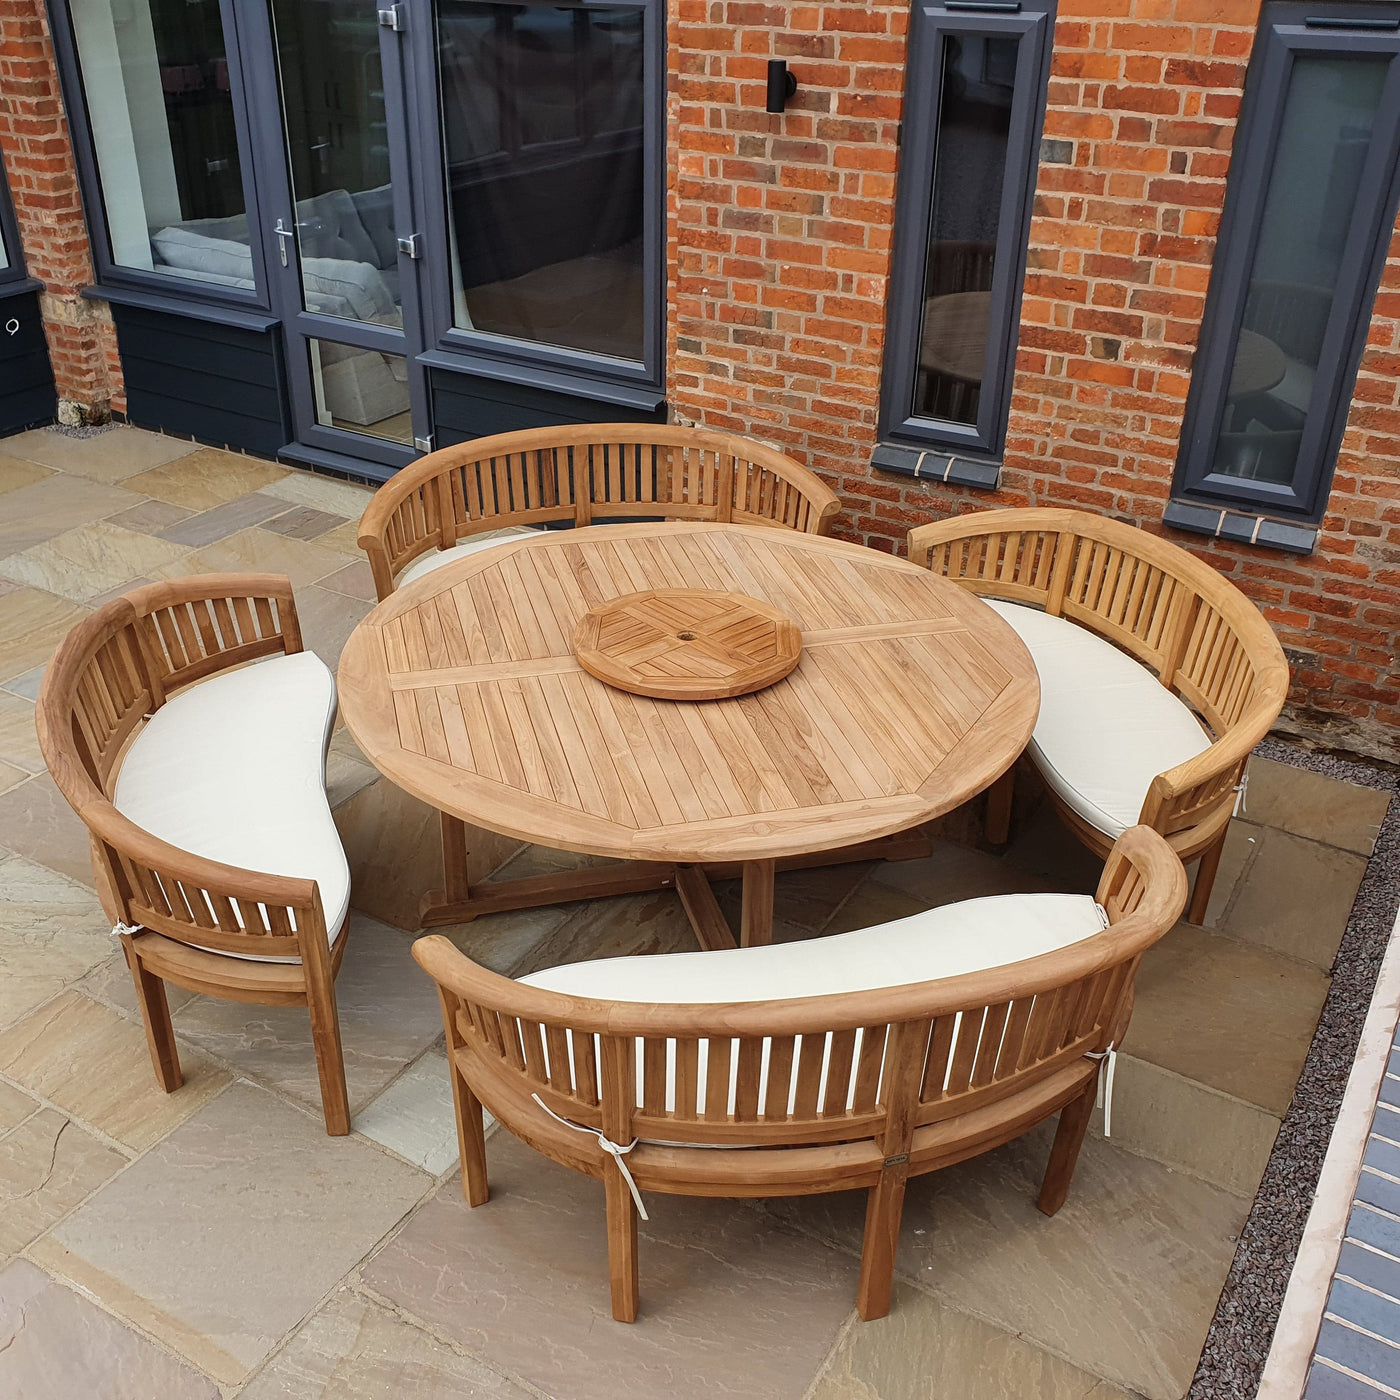 A Teak 180cm Round Maximus Set (4 San Francisco Benches) complete set with cushions on a brick patio, with a backdrop of a brick building and glass doors.